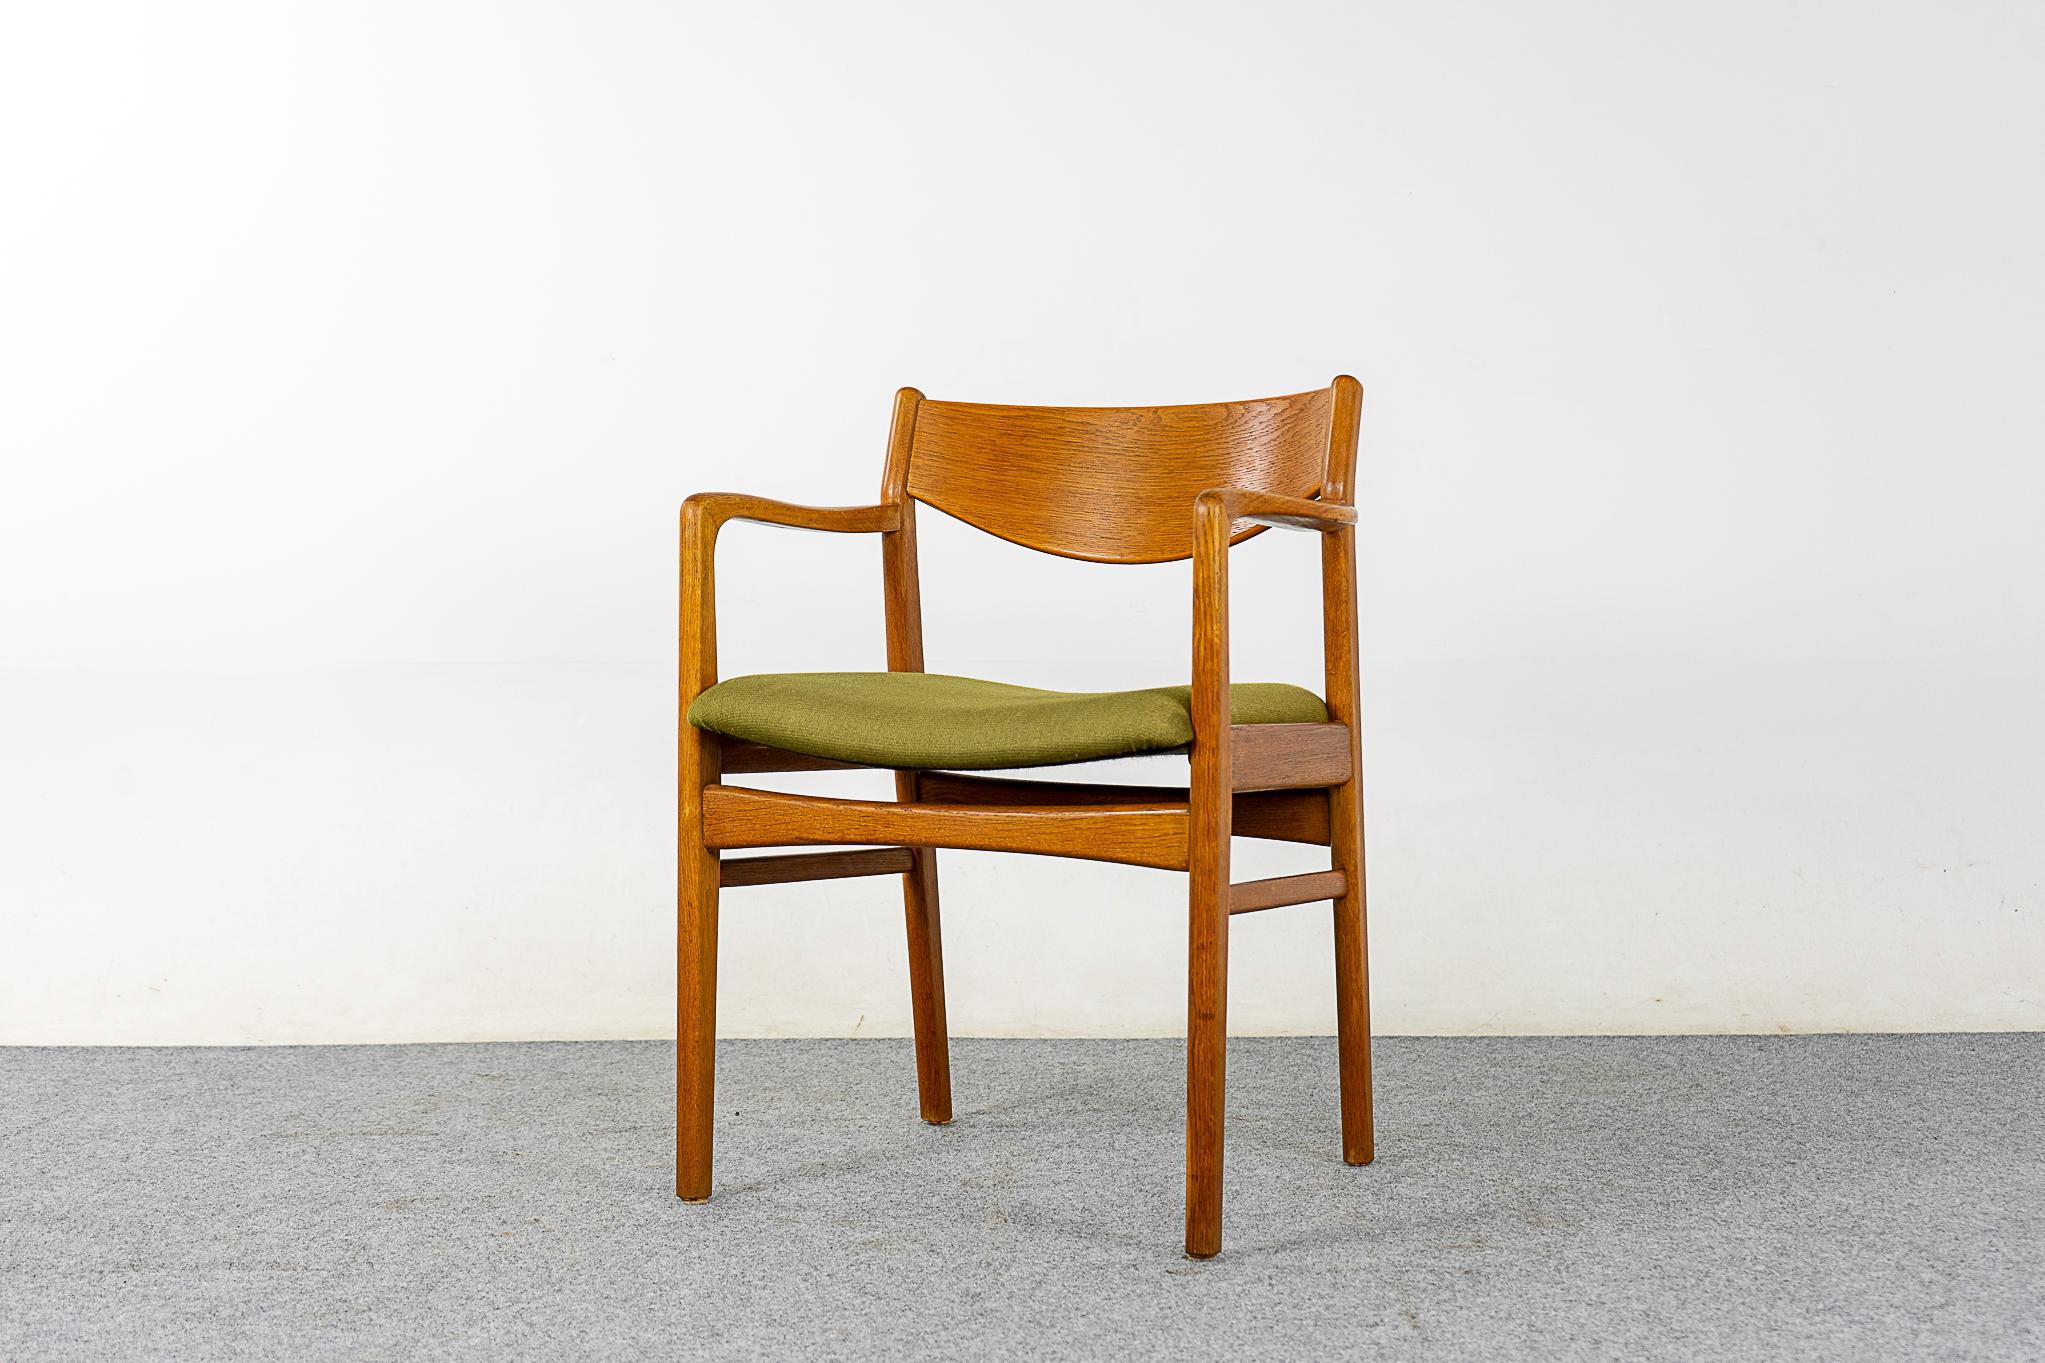 Oak mid-century armchair, circa 1960's. Beautifully sculpted frame with lovely lines. Comfort, without an imposing footprint!

Please inquire for remote and international shipping rates.